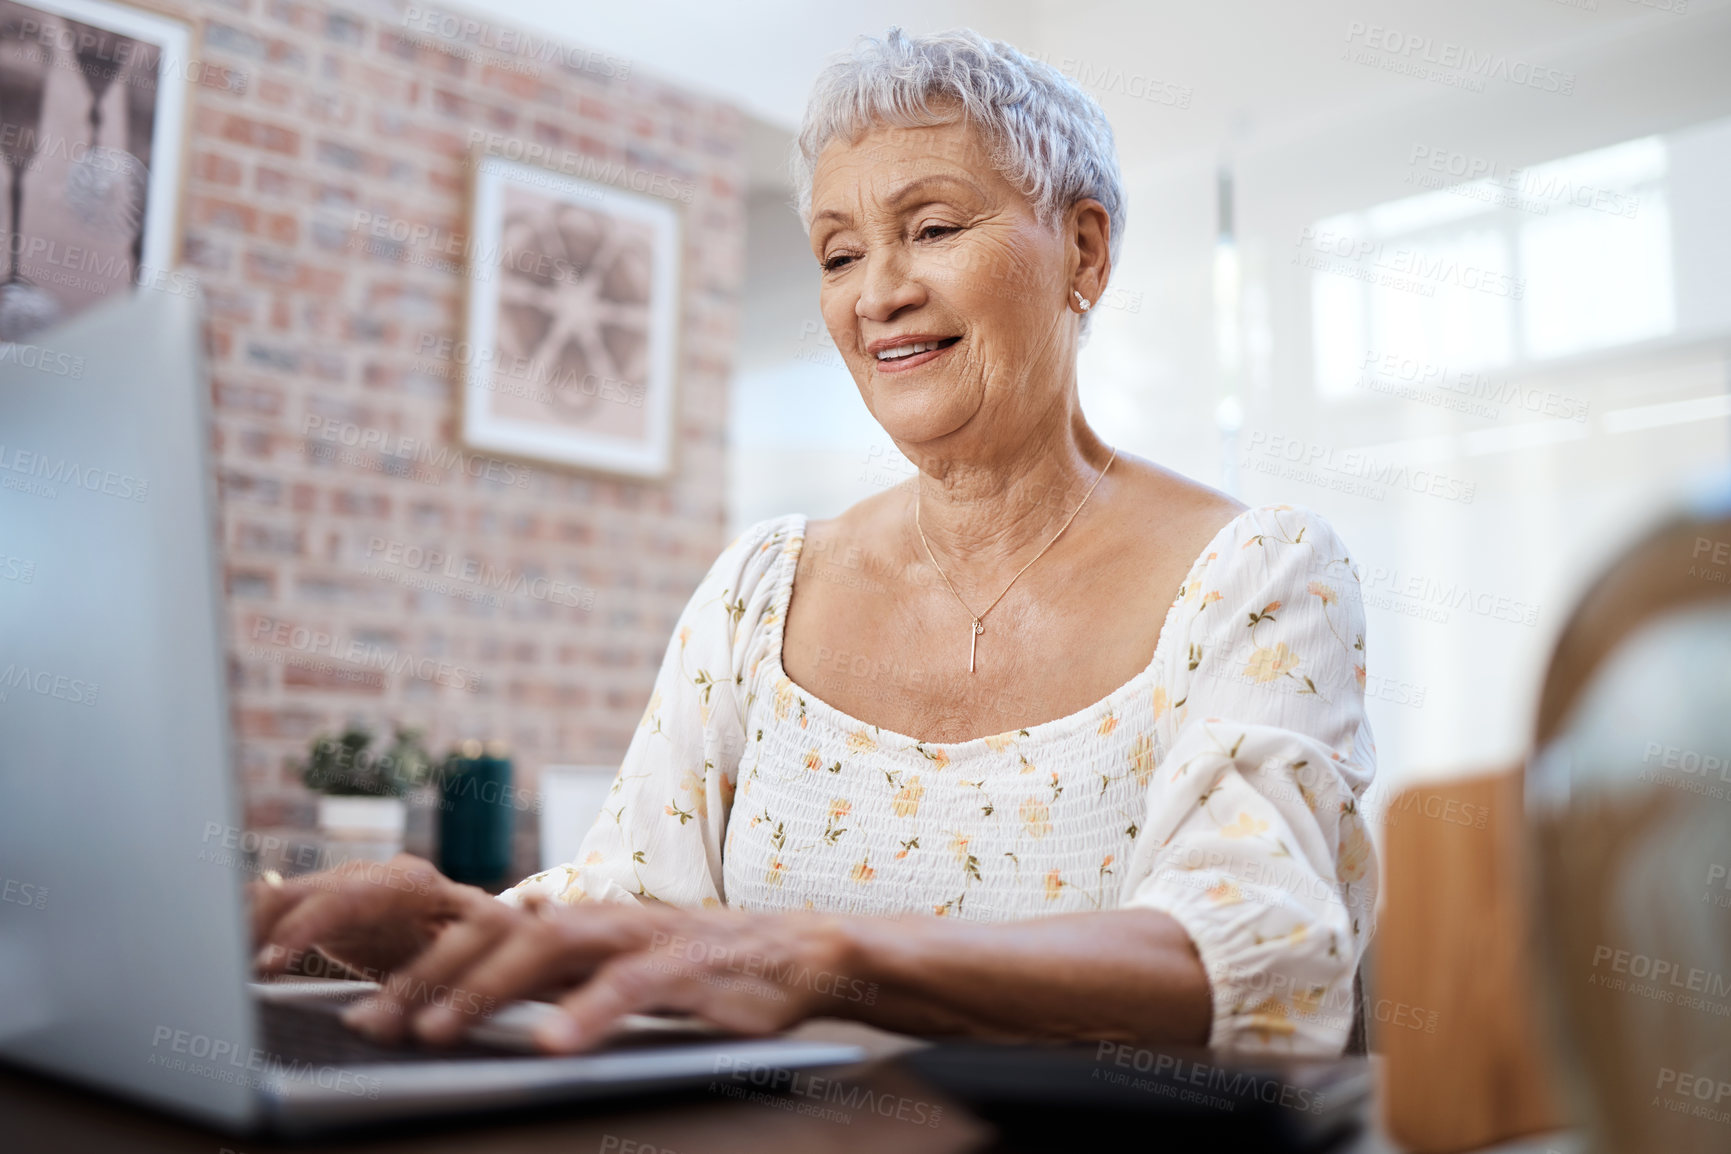 Buy stock photo Shot of a senior woman using a laptop at home